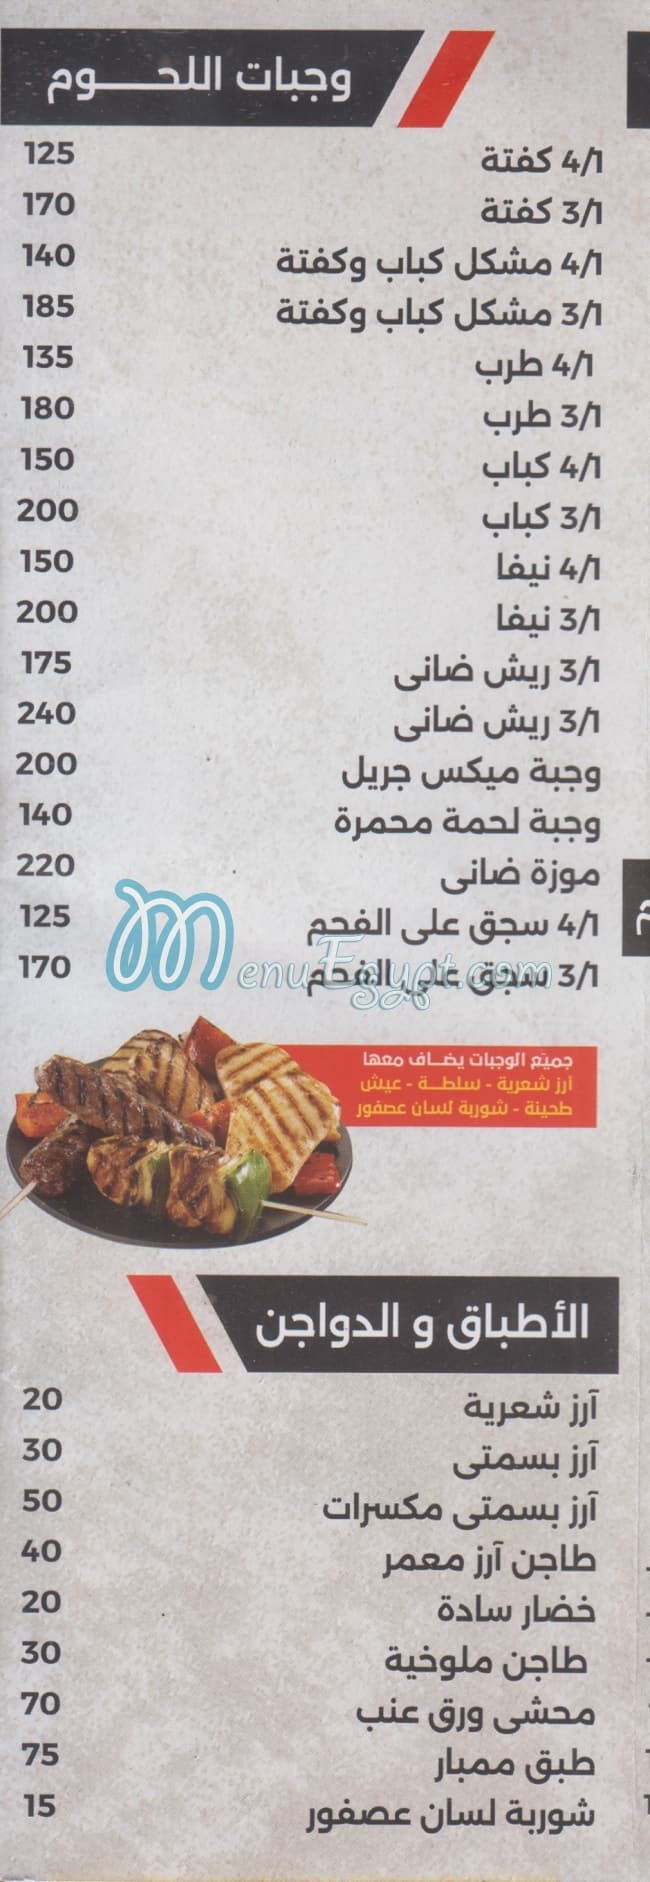 Abo Zied menu prices